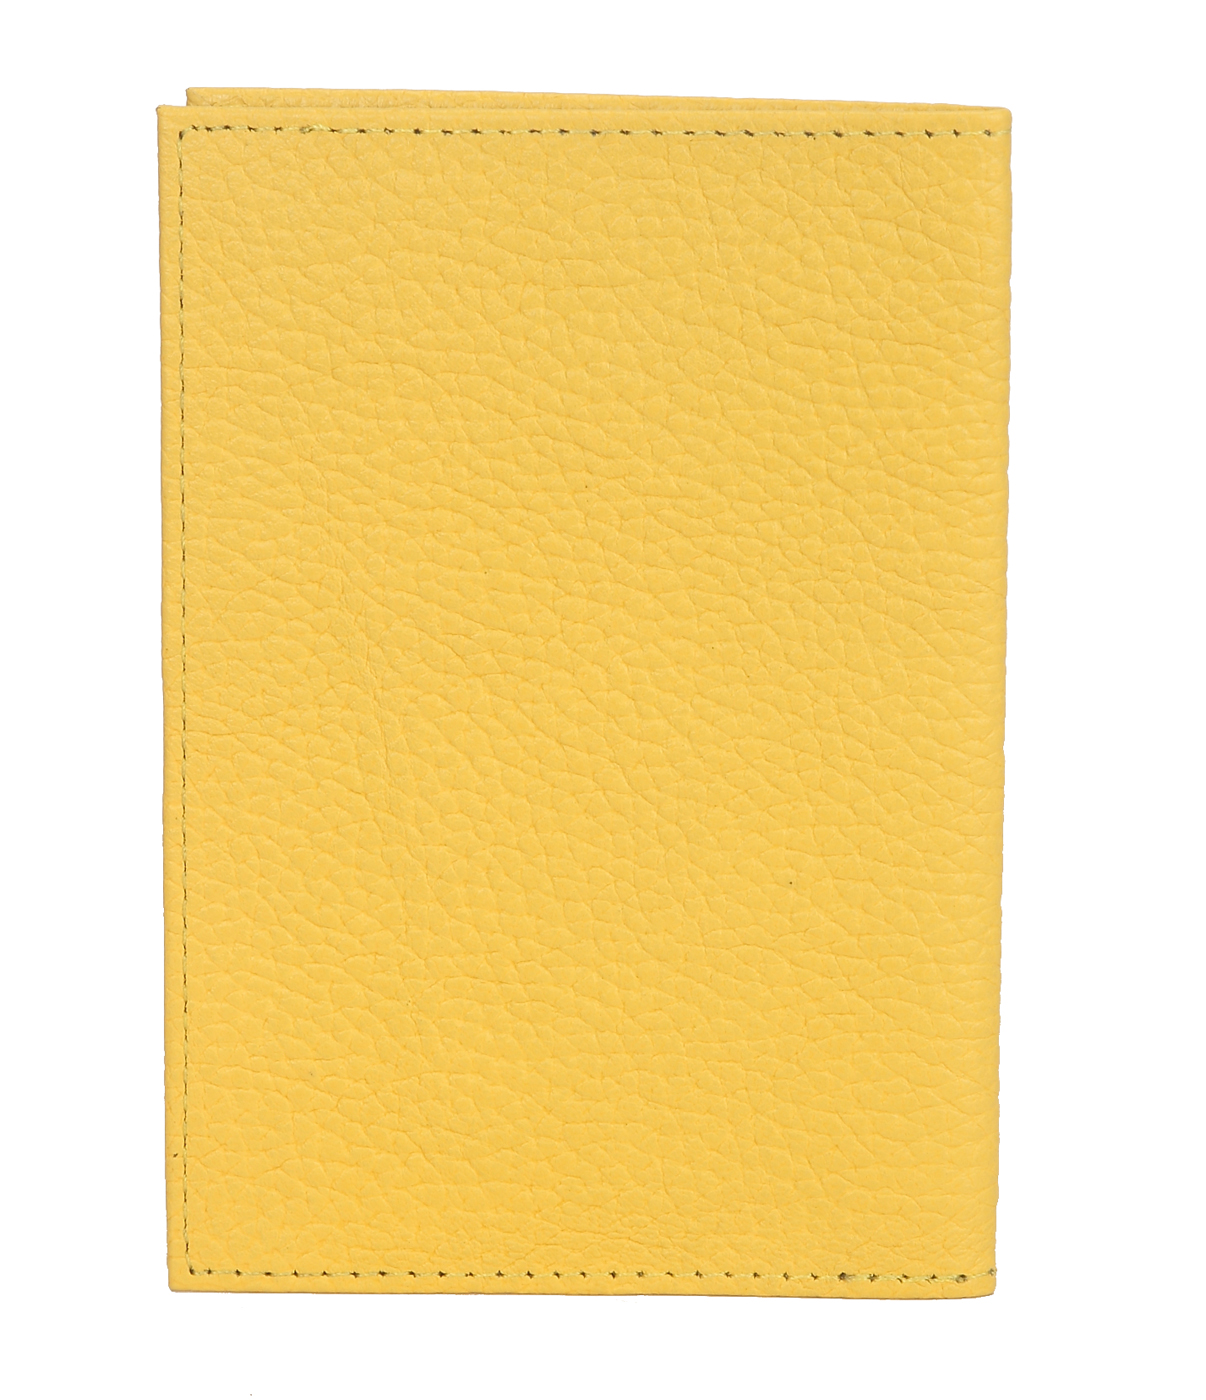 W251--Passport cover in Genuine Leather - Yellow